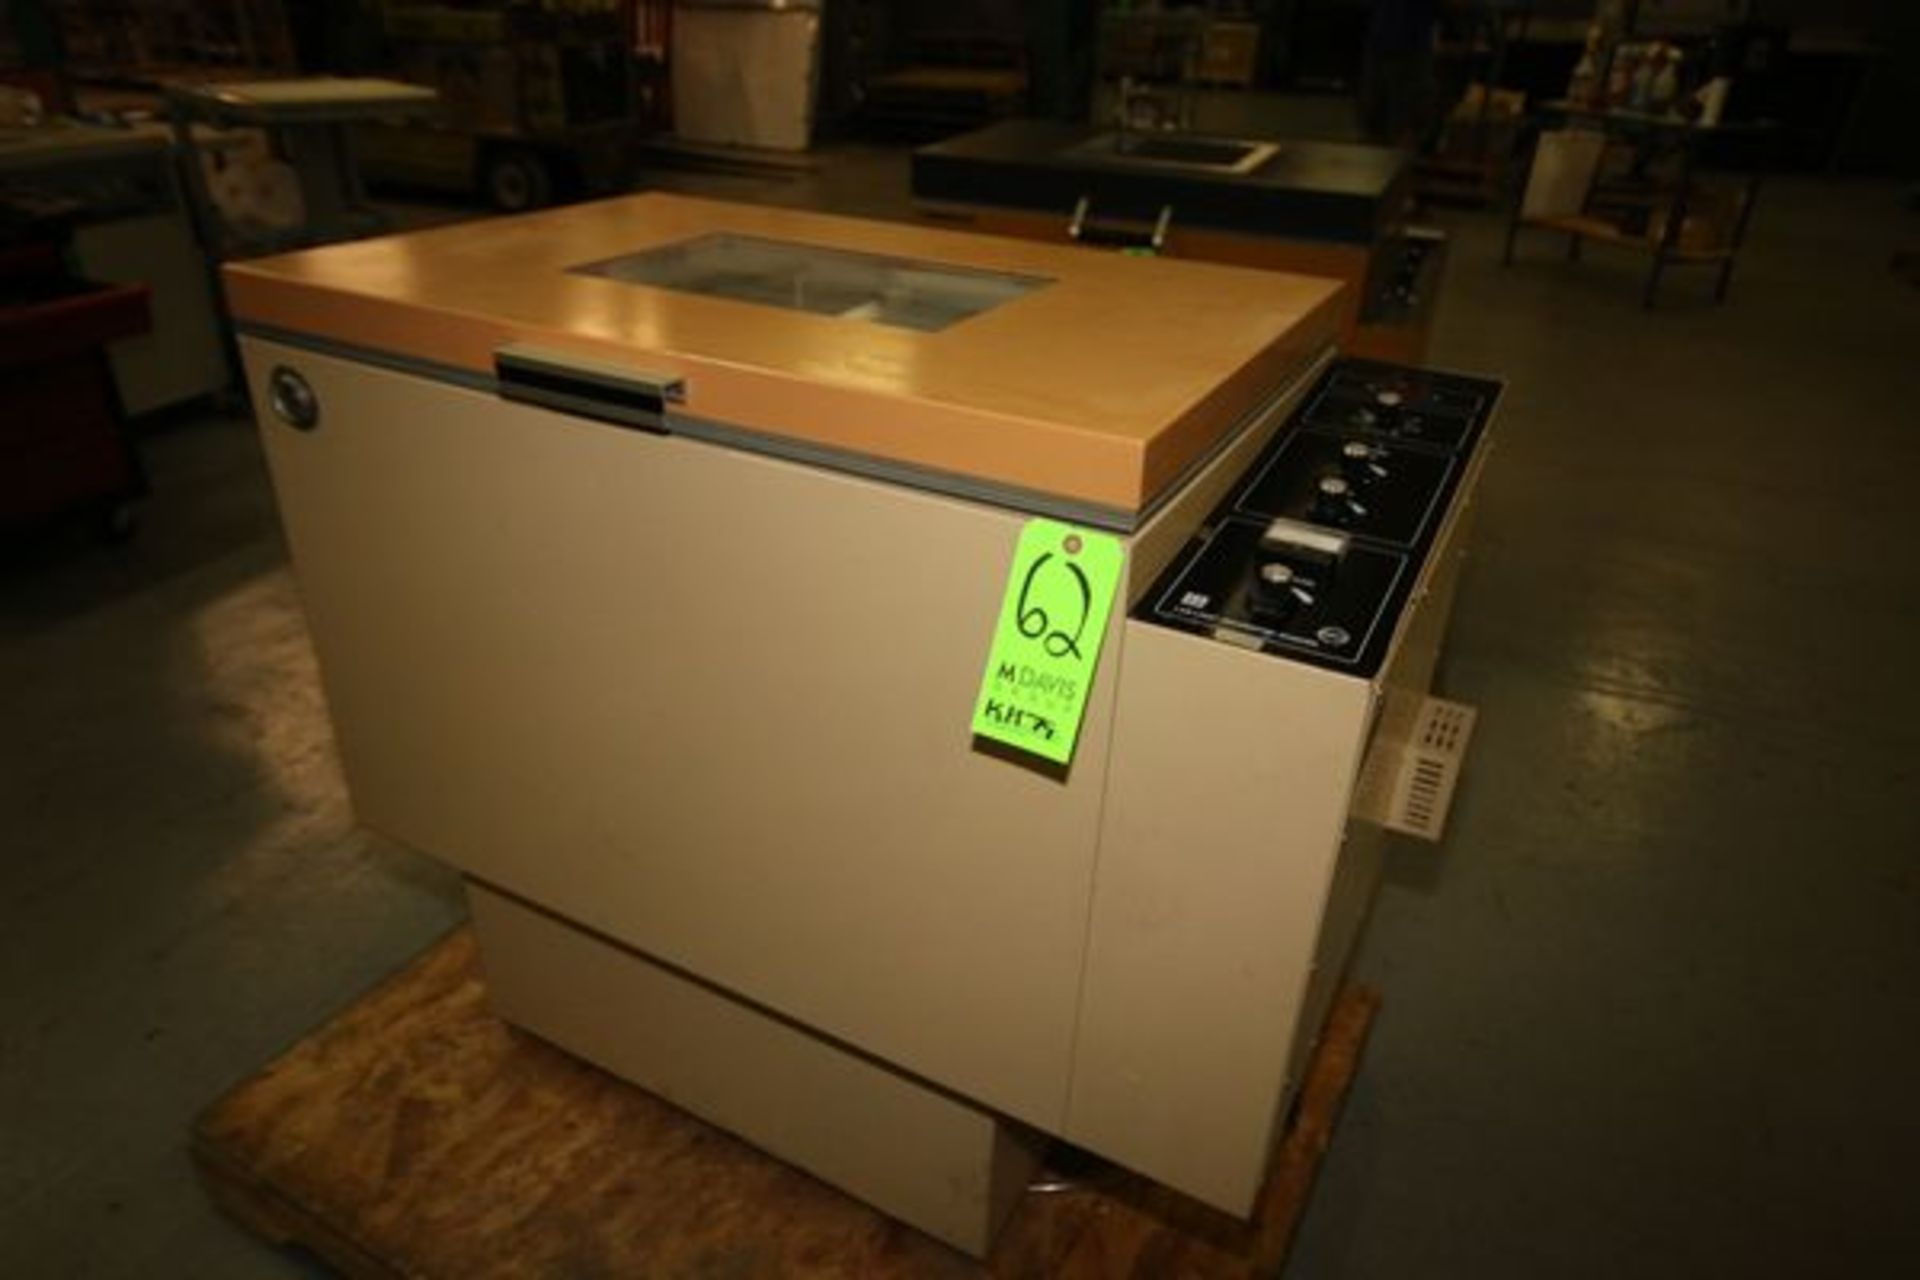 Lab-Line Incubator-Shaker, M/N 3526CC, S/N 0589-1835, with 1/4 hp Motor, Overall Dimensions: 46"